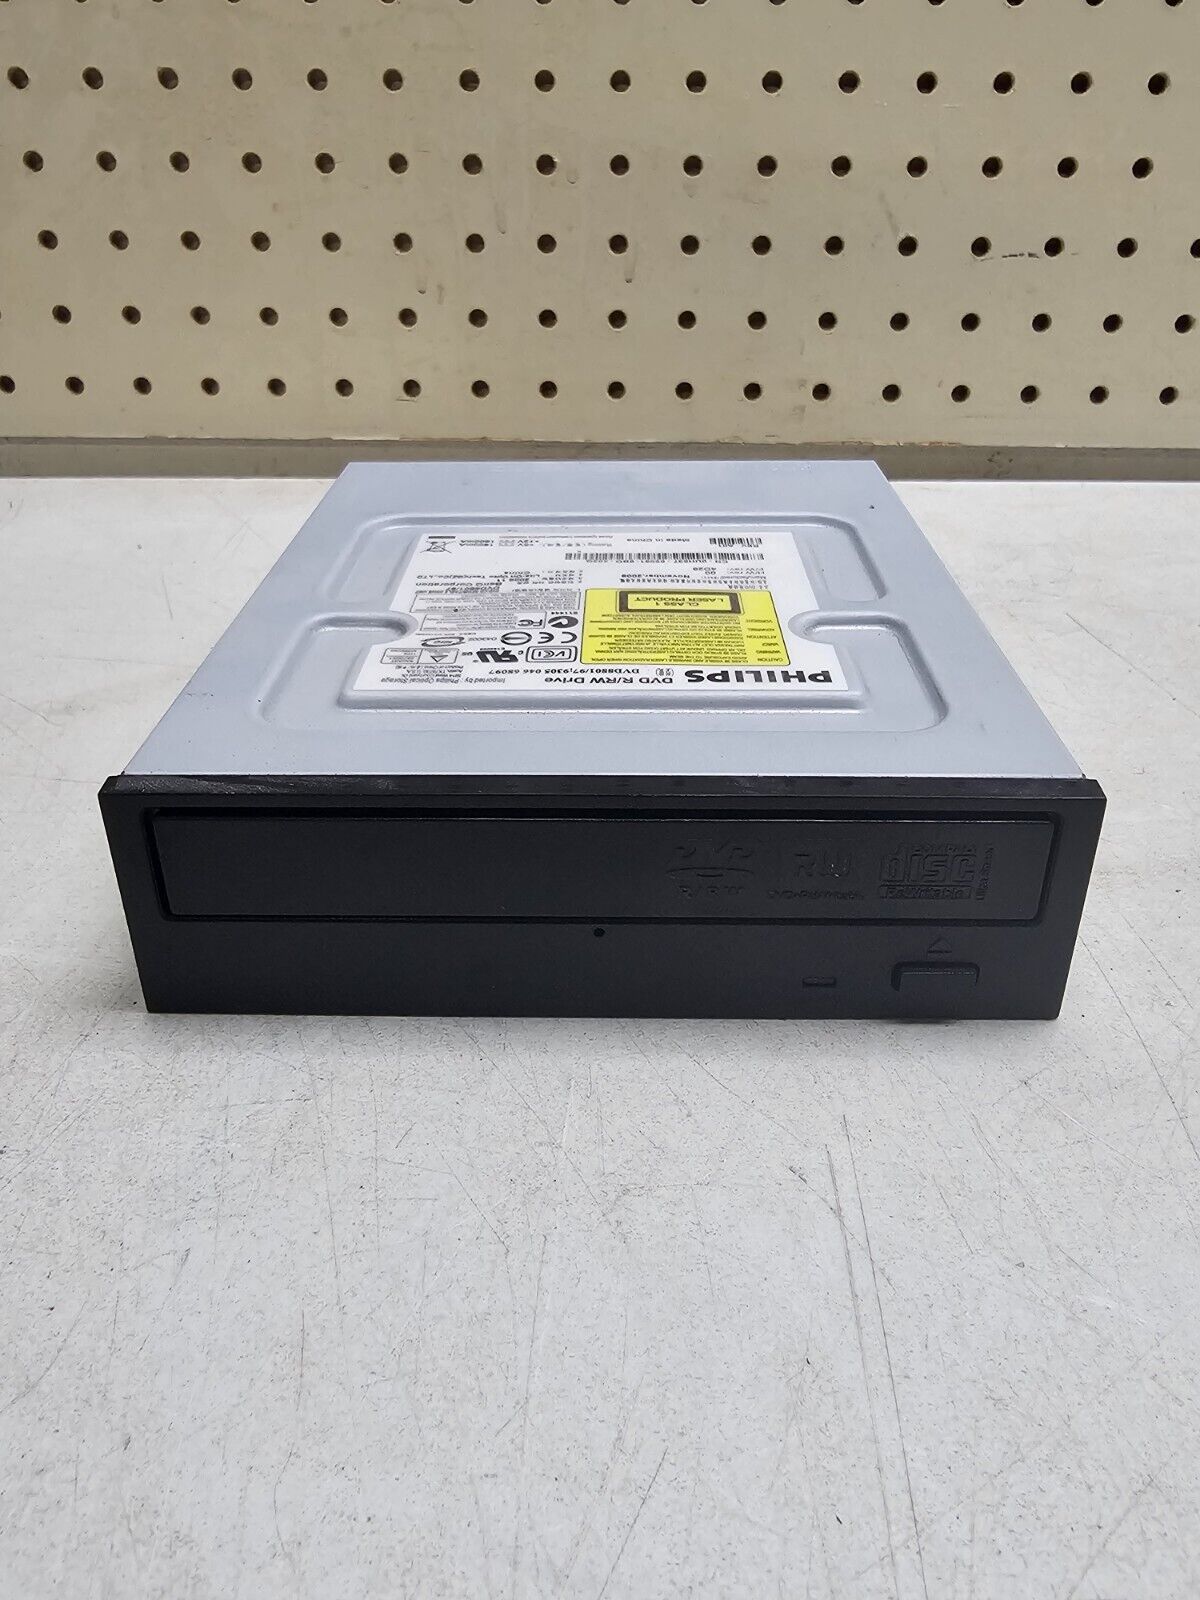 Philips DVD/CD Rewritable Drive Unit Model: DVD8801/97 Tested and Works